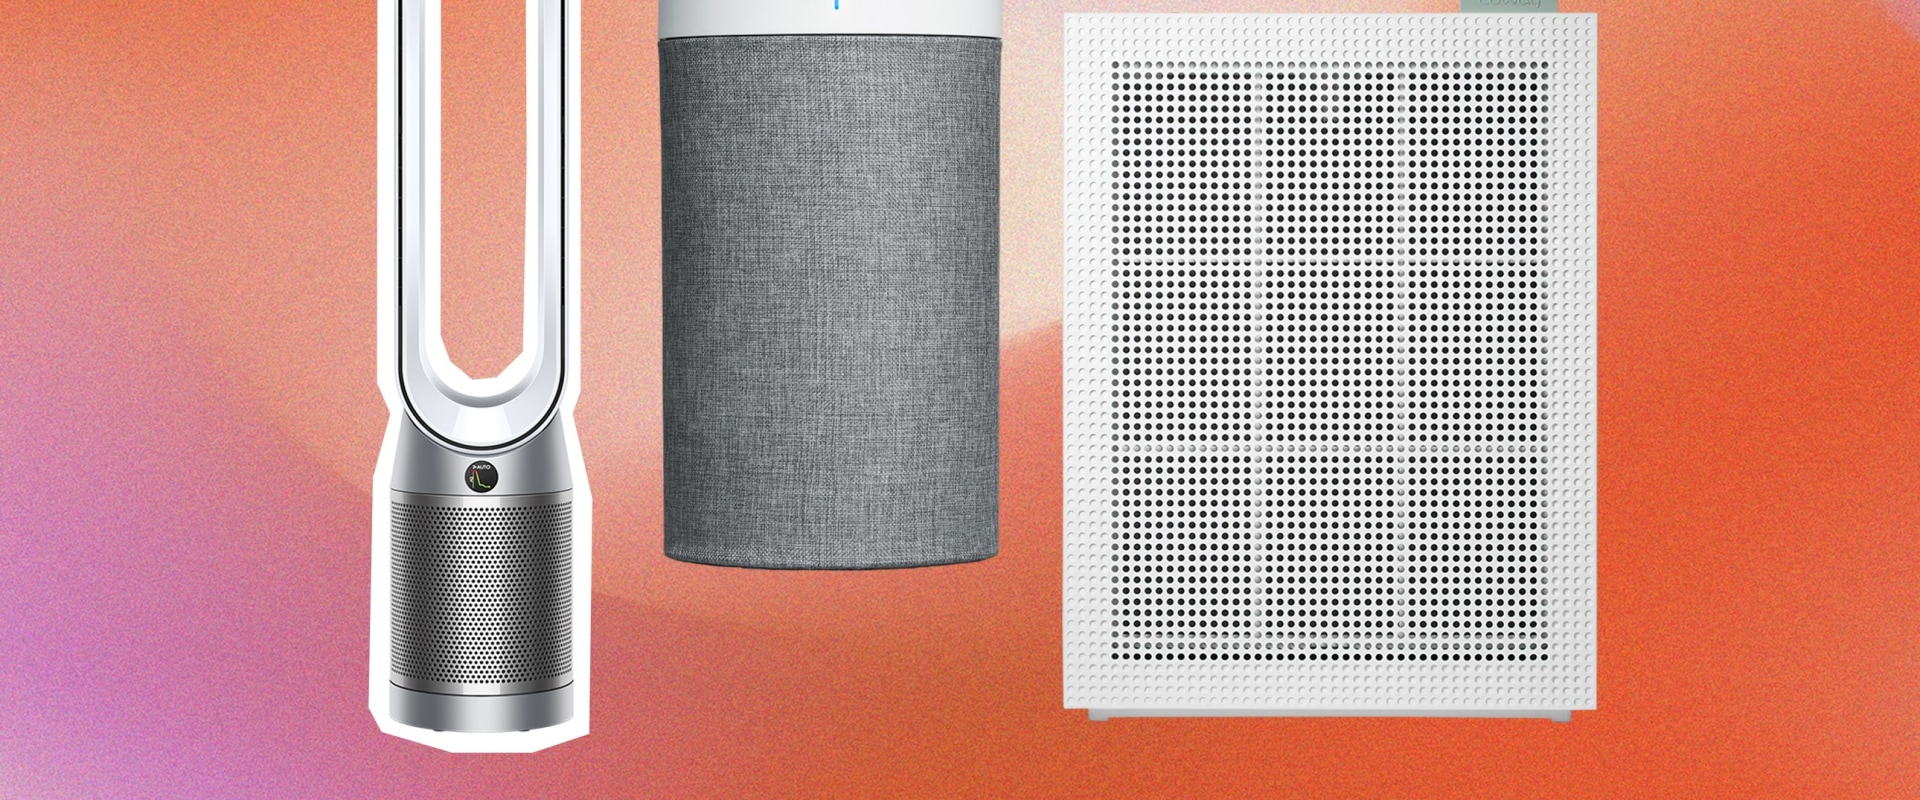 Are Washable Filters the Best Choice for Air Purifiers?